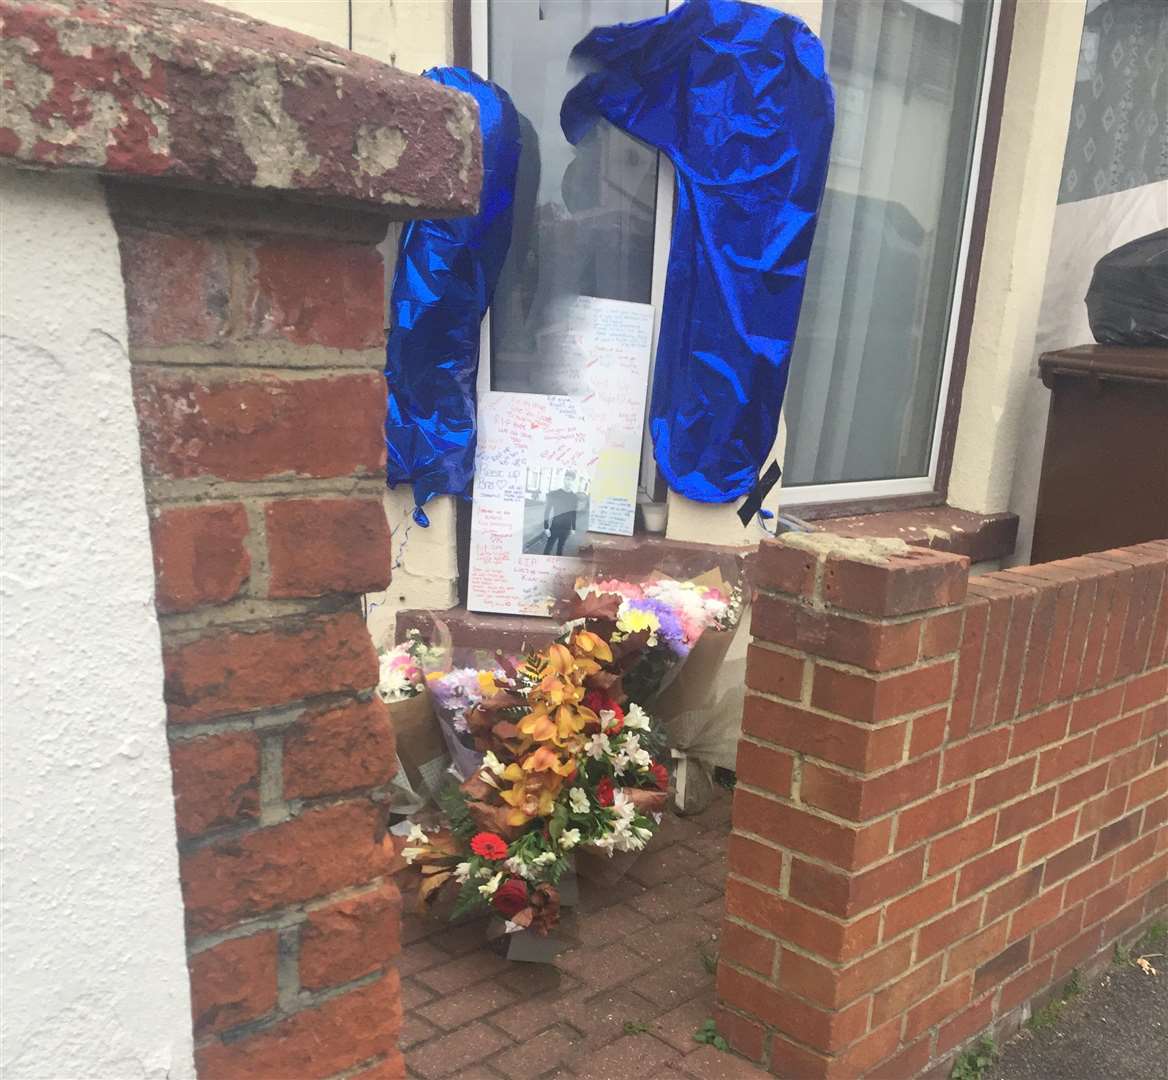 A shrine was set up in memory of tragic Kyle Yule,17, outside his Gillingham home.